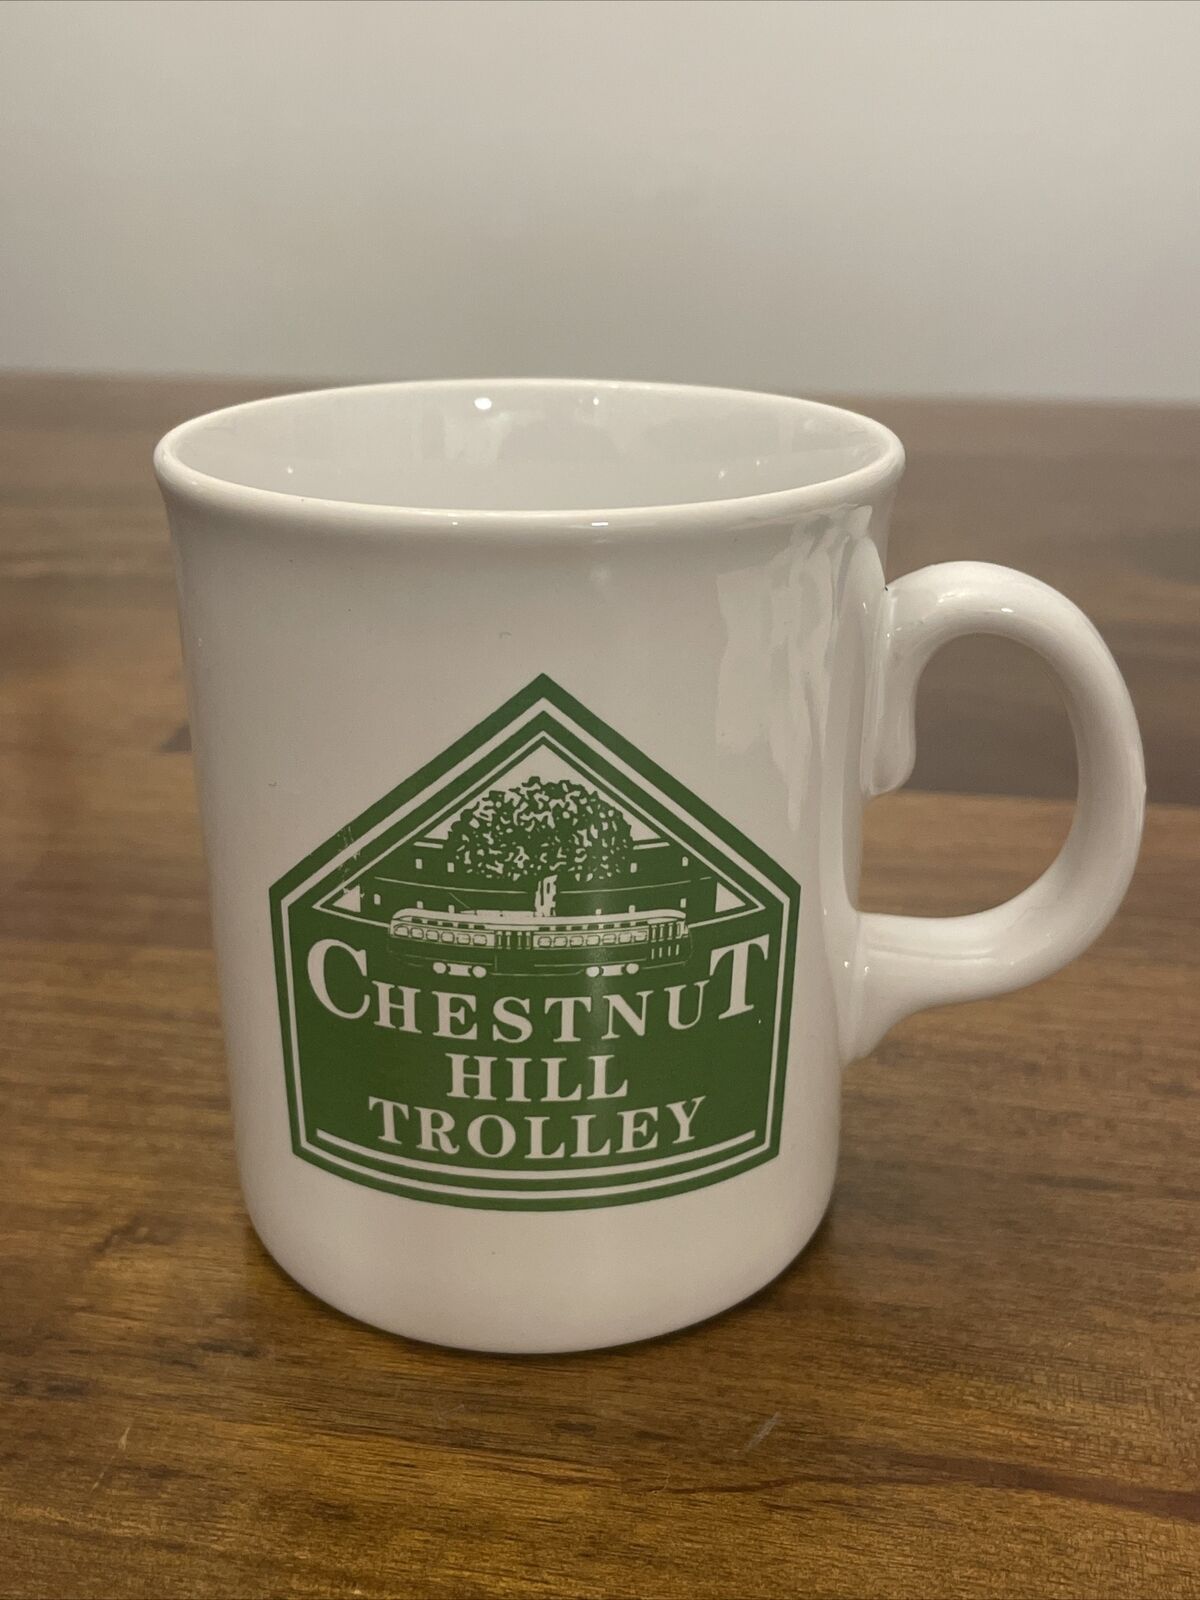 RARE VINTAGE CHESTNUT HILL TROLLEY MUG CUP TRANSPORTATION COLLECTIBLE England